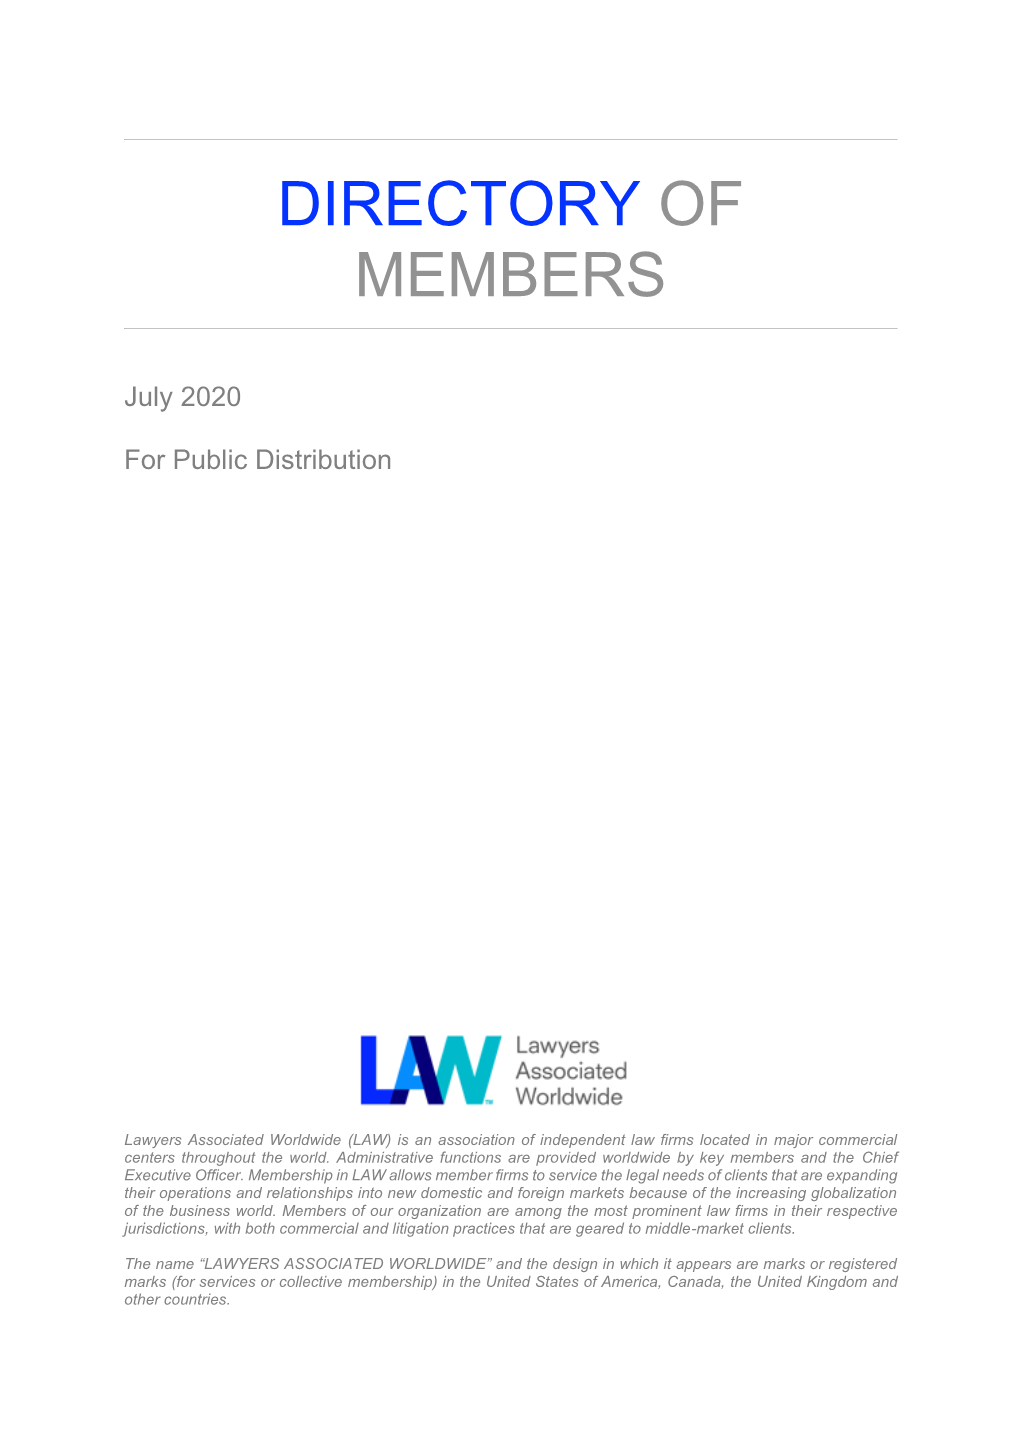 LAW Directory of Members